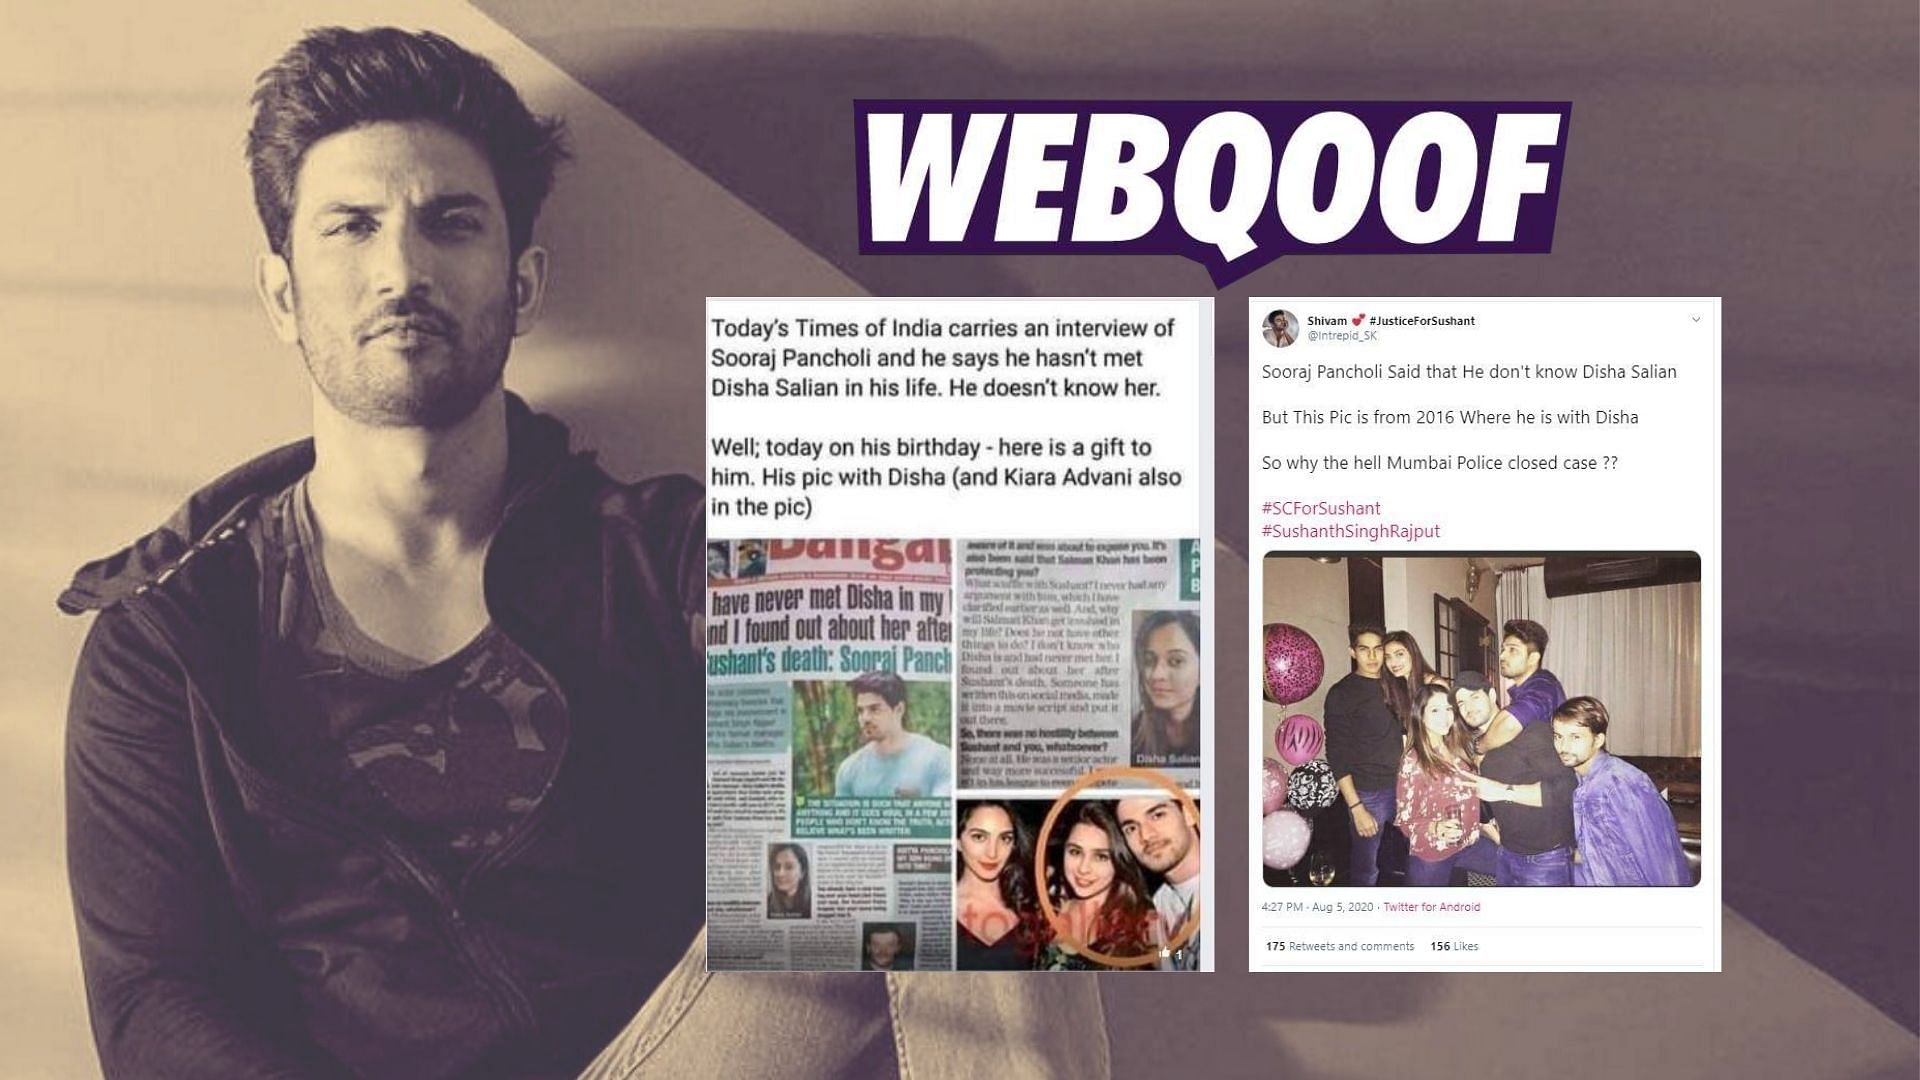 After Sooraj Pancholi clarified that “he had never met Disha Salian” several images claiming that he was photographed with Disha, Sushant’s ex-manger, started doing the rounds on social media.